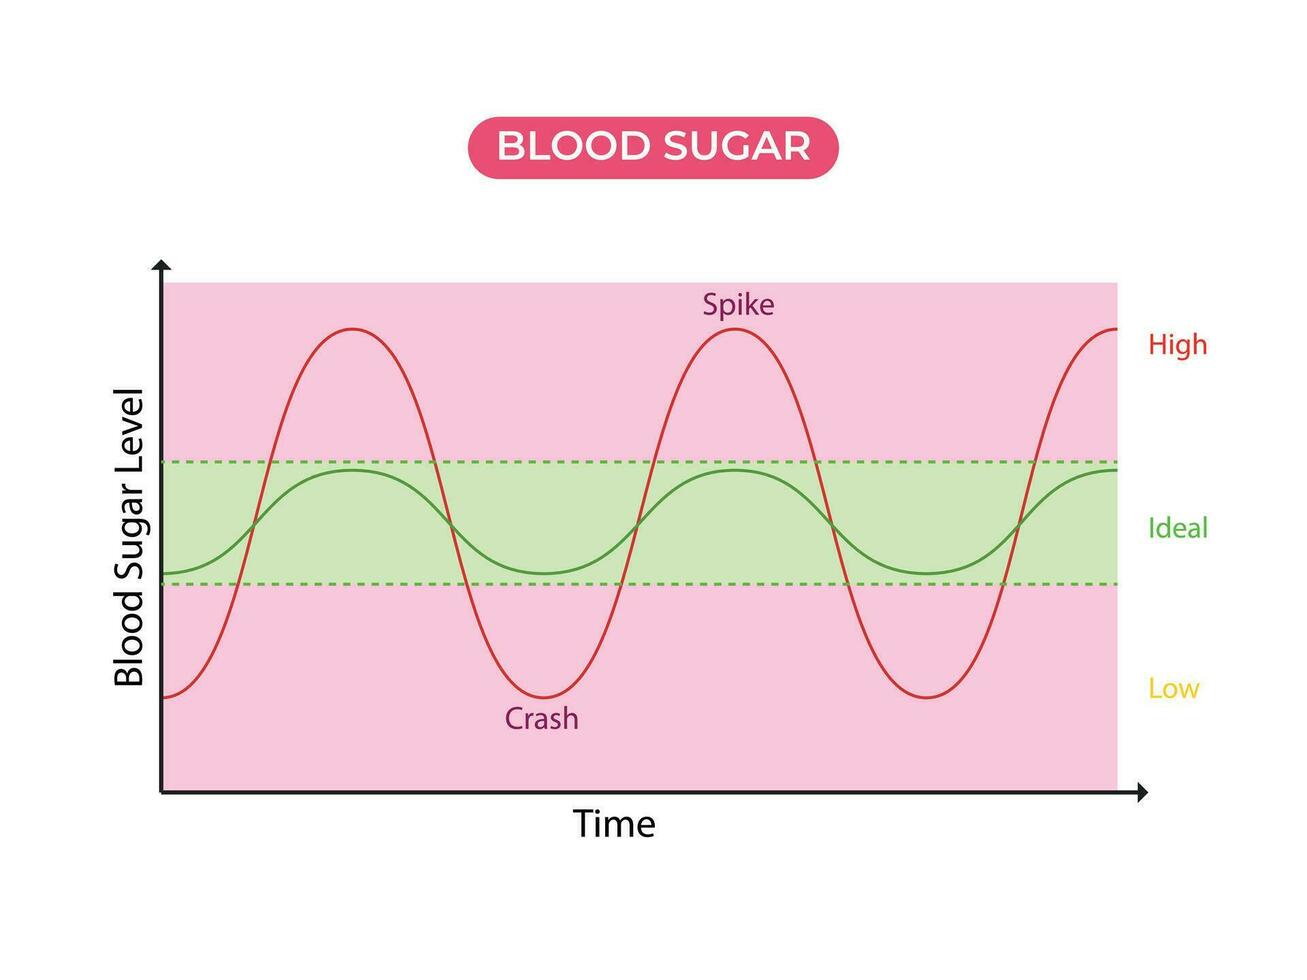 Blood sugar balance levels, diabetes. Normal or ideal, low and high unstable levels with spike and crush vector